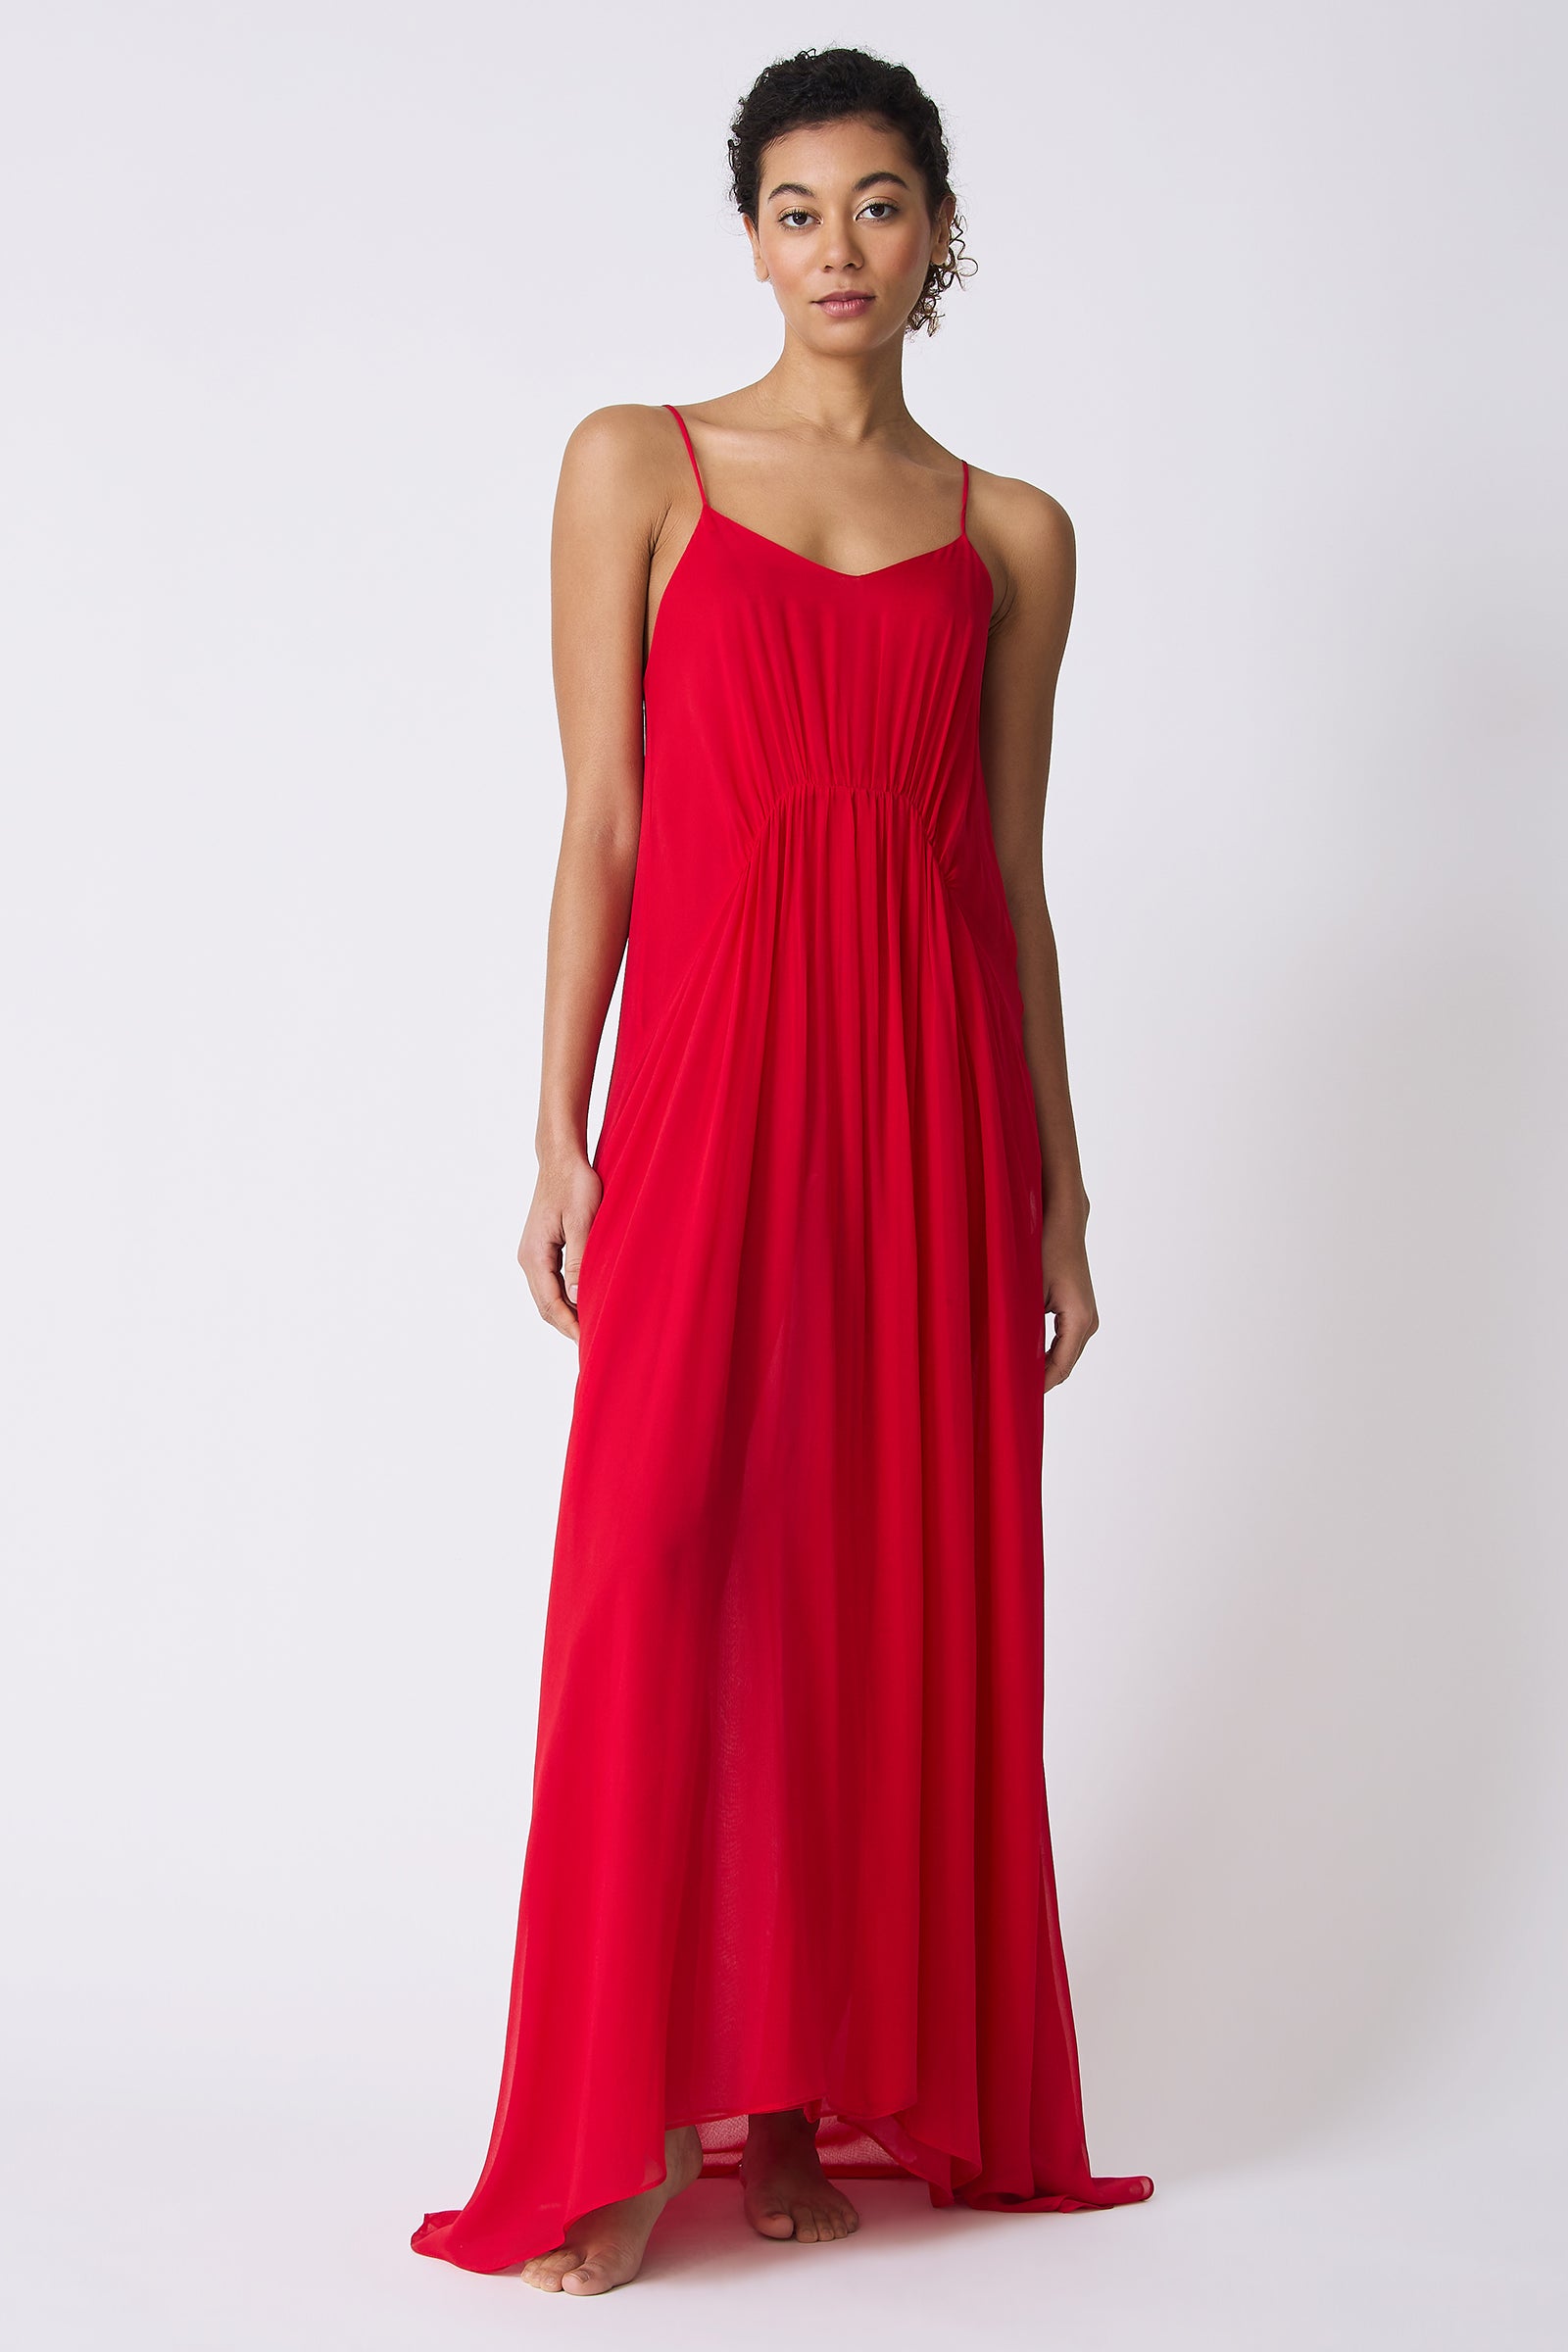 Kal Rieman Cora Shirred Maxi Dress in Red on model full front view